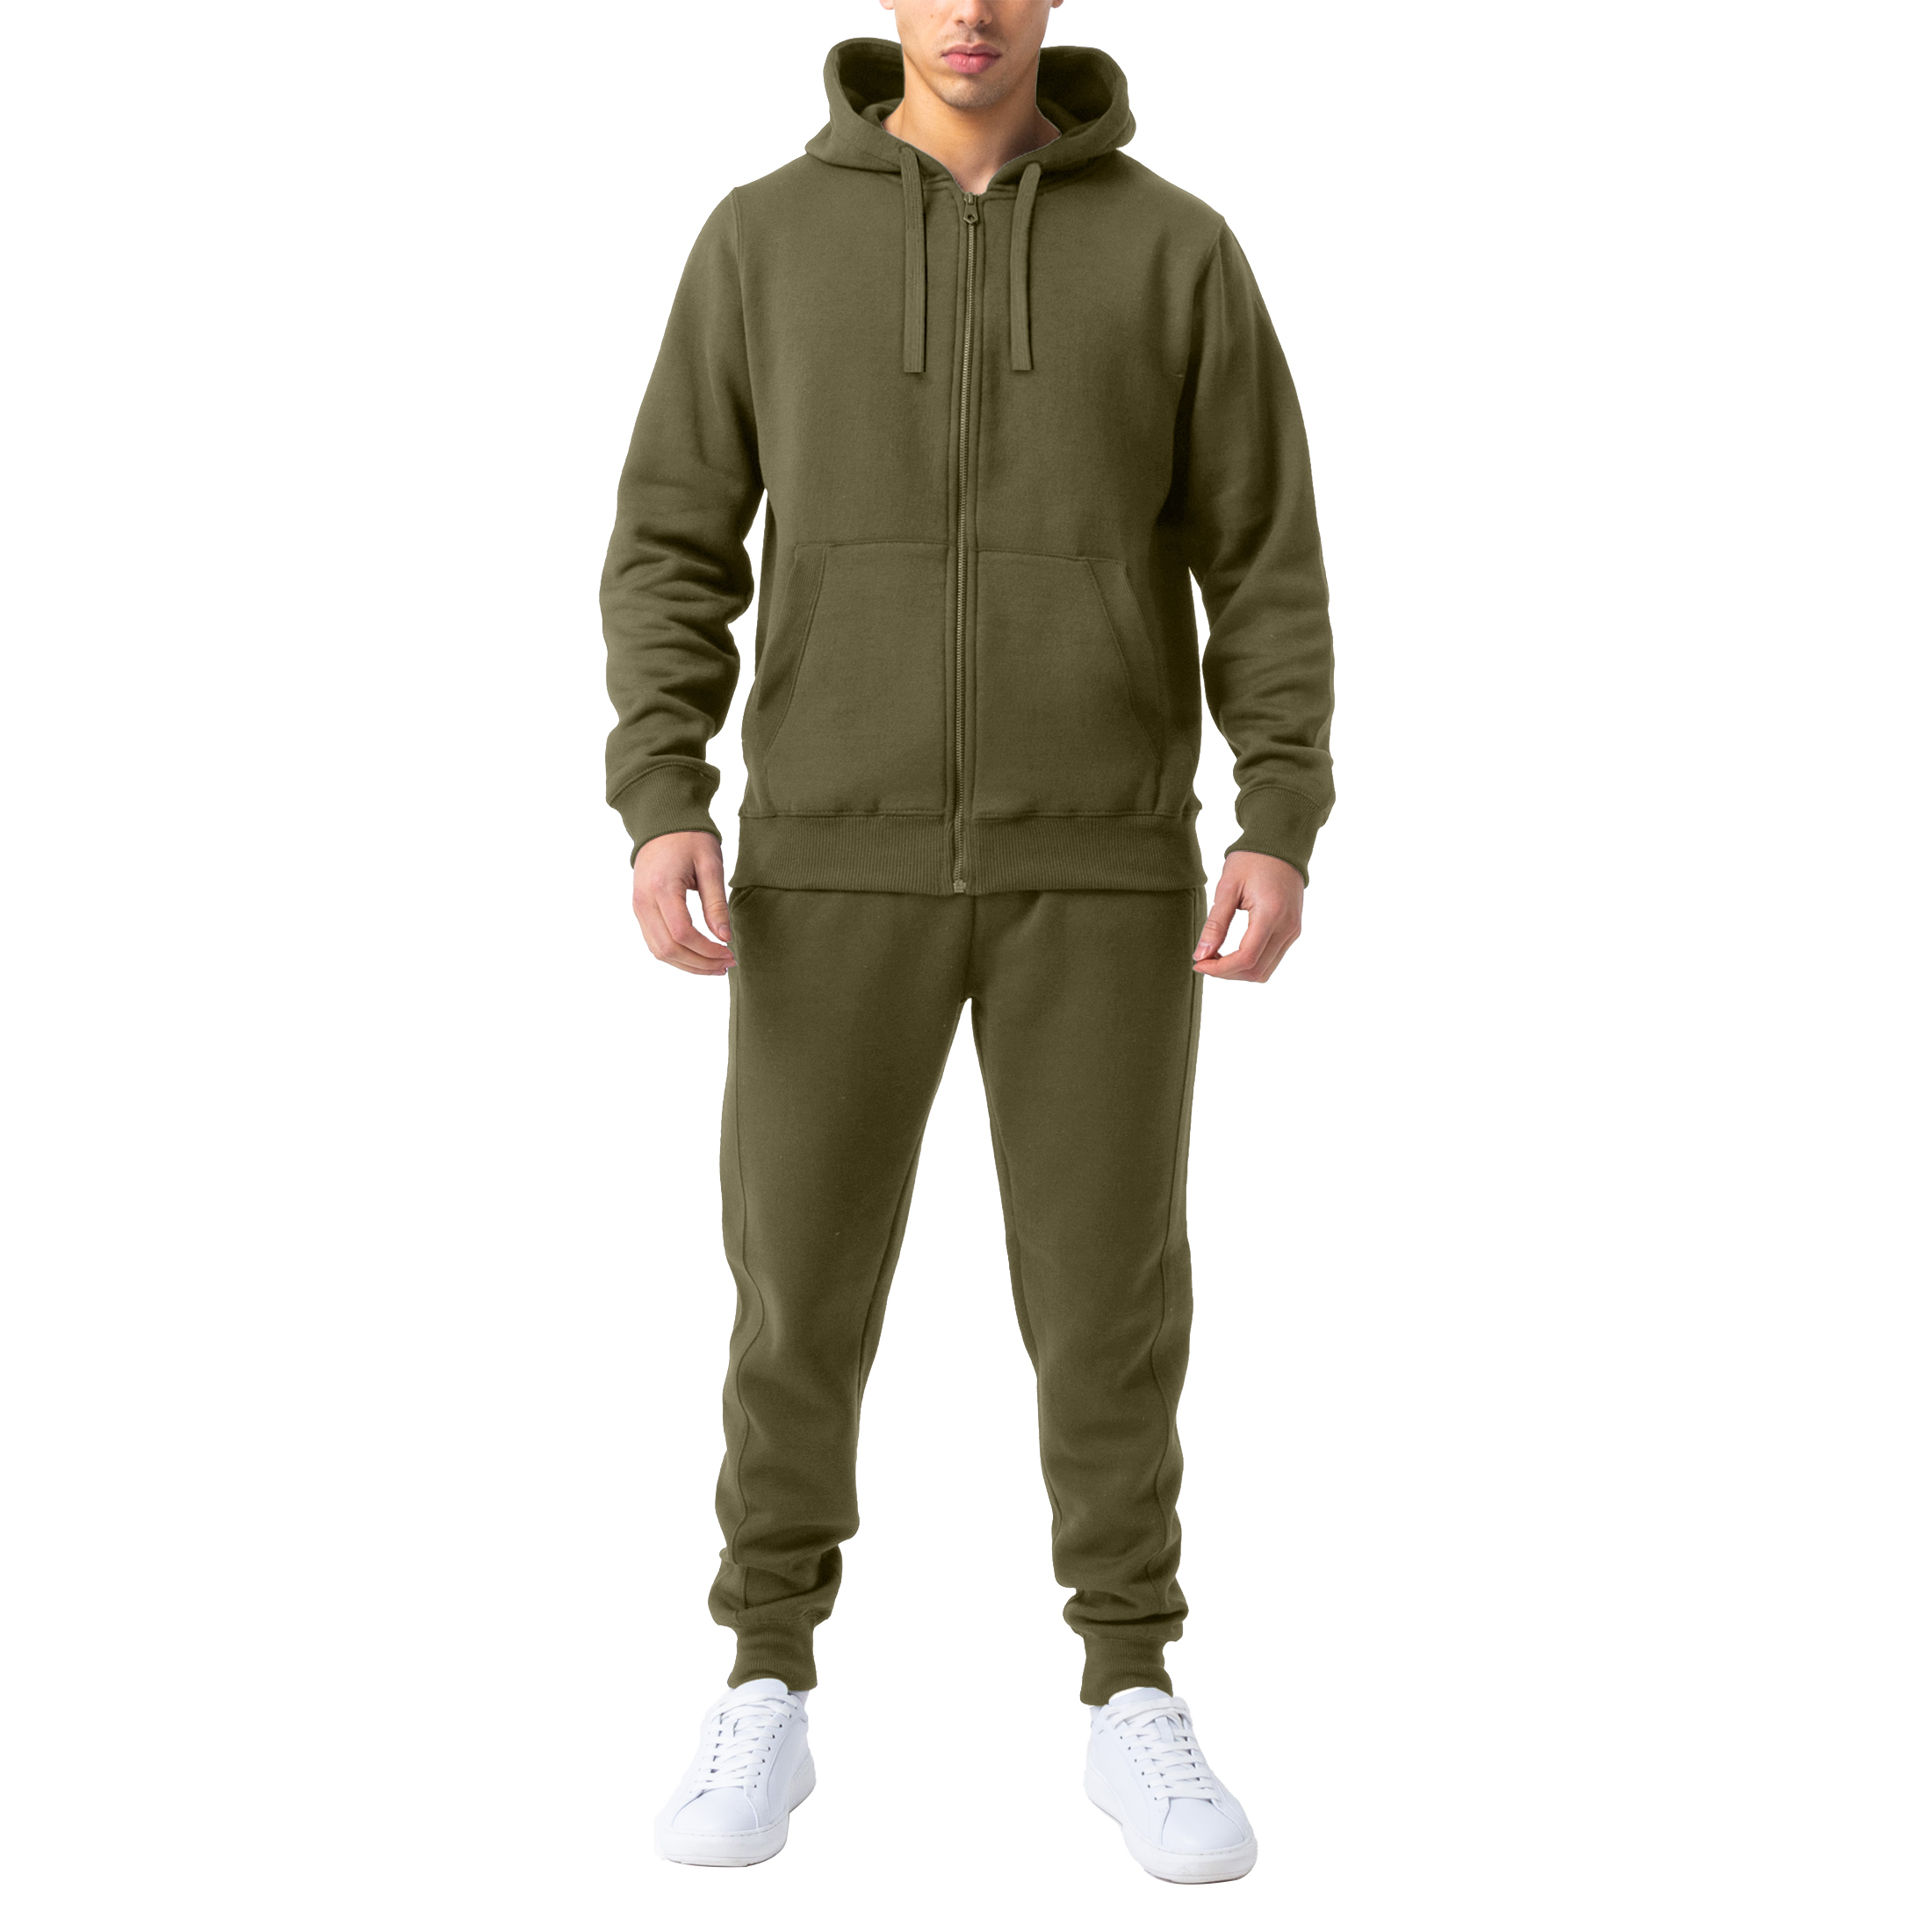 Men's Casual Jogging Athletic Active Full Zip Up Tracksuit - Olive, X-Large